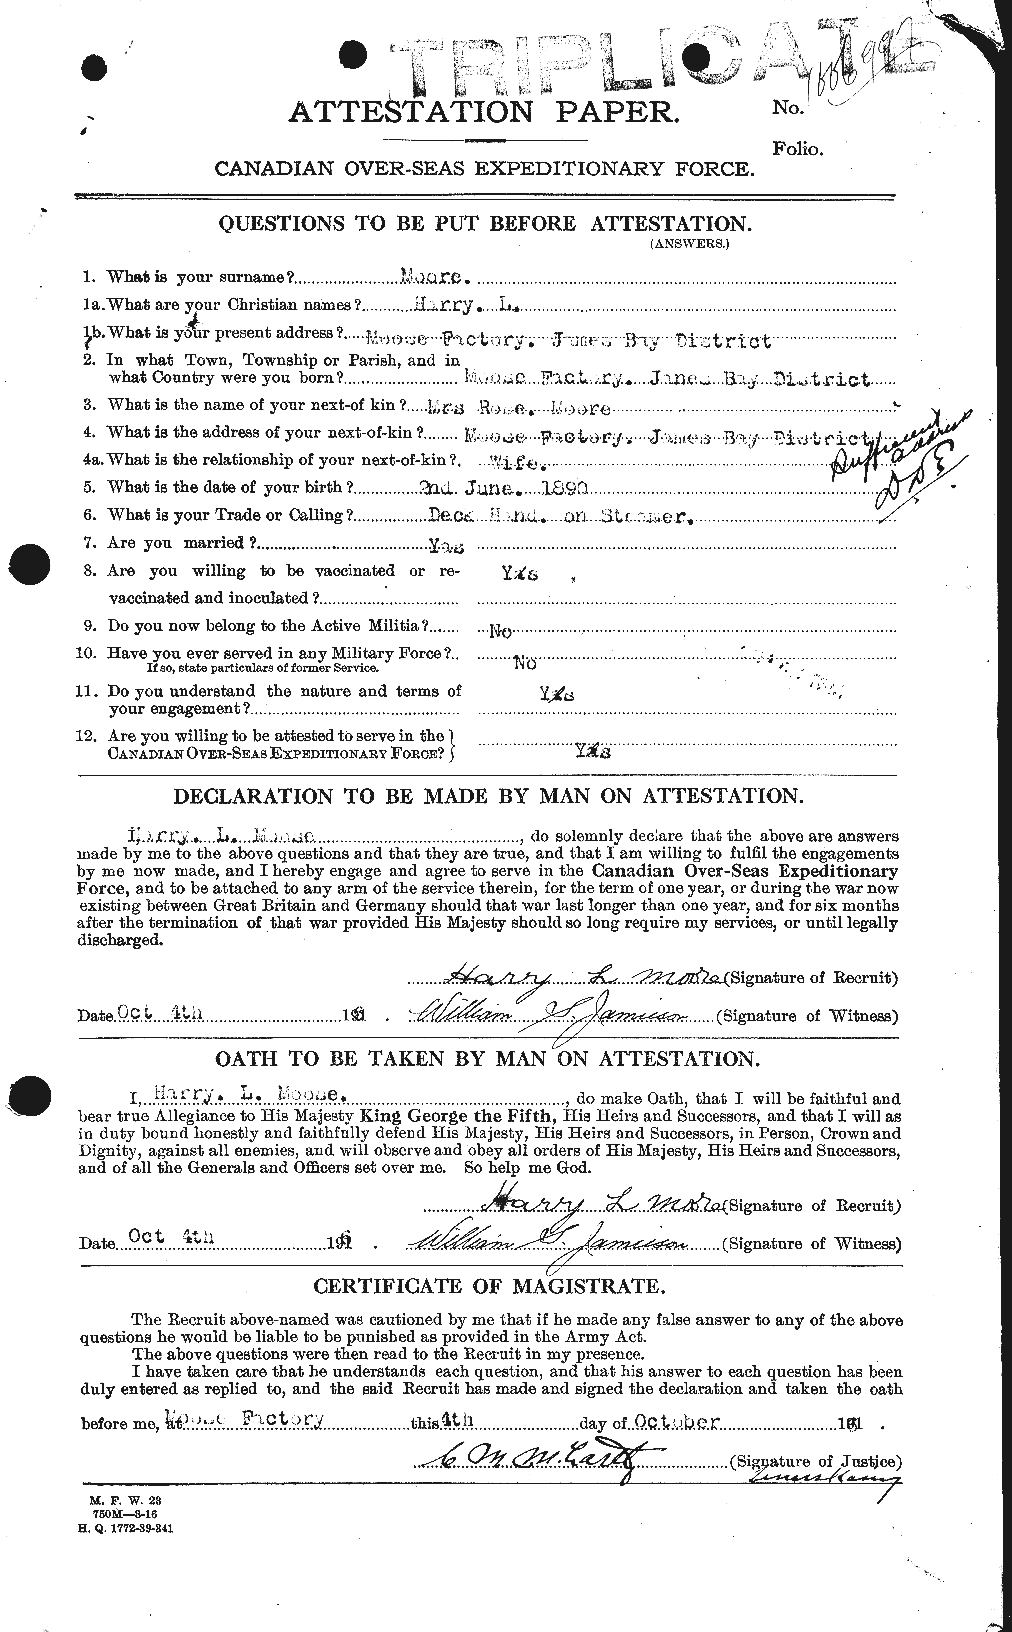 Personnel Records of the First World War - CEF 502085a